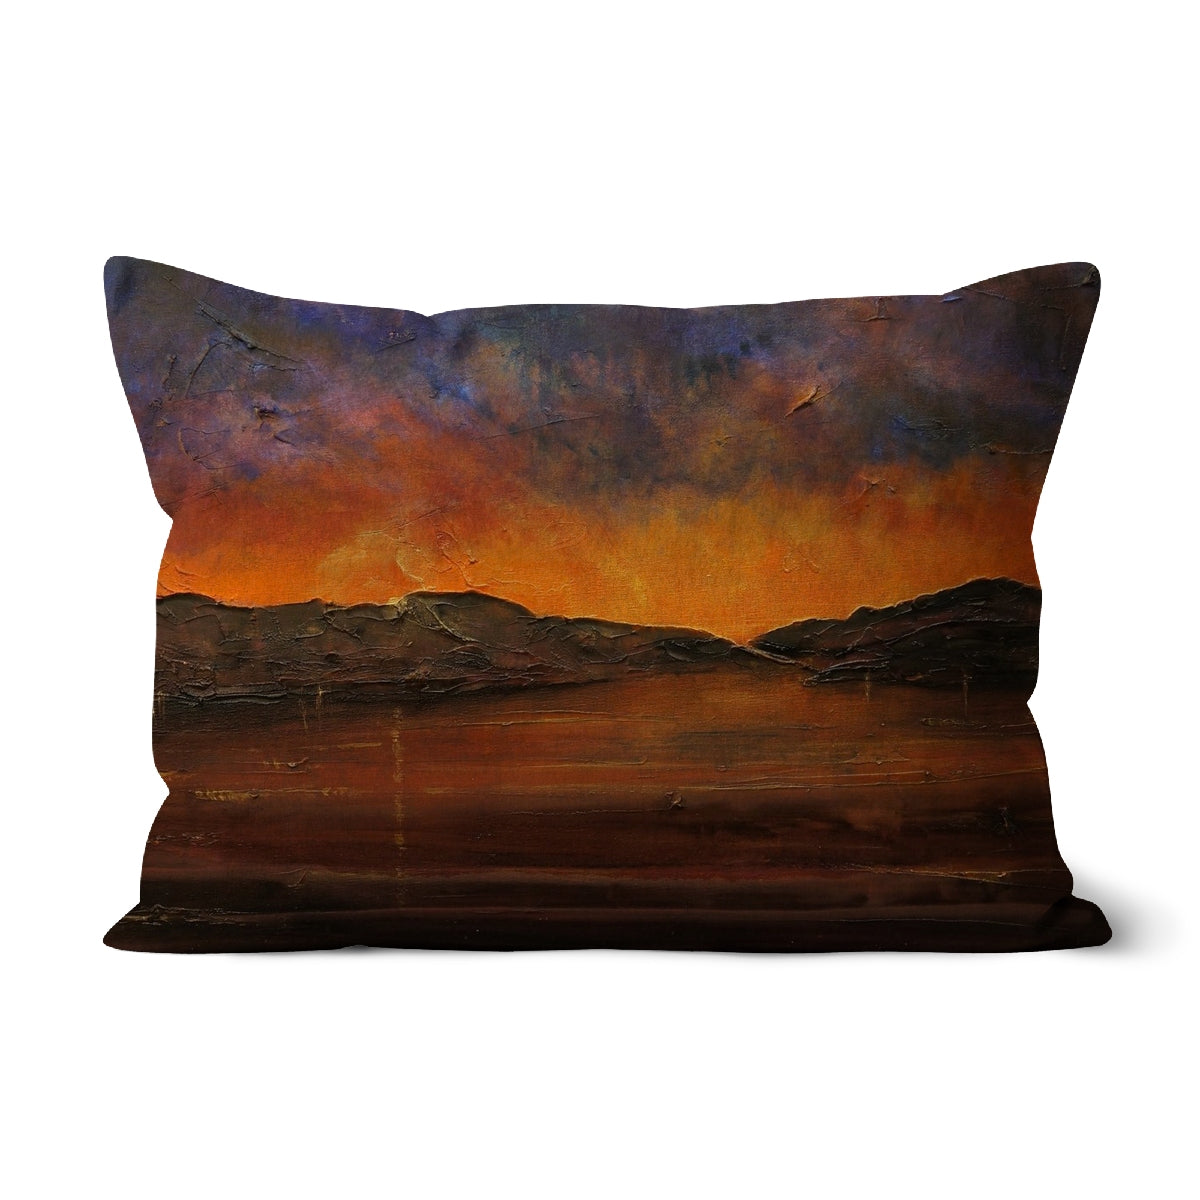 A Brooding Clyde Dusk Art Gifts Cushion-Cushions-River Clyde Art Gallery-Linen-19"x13"-Paintings, Prints, Homeware, Art Gifts From Scotland By Scottish Artist Kevin Hunter